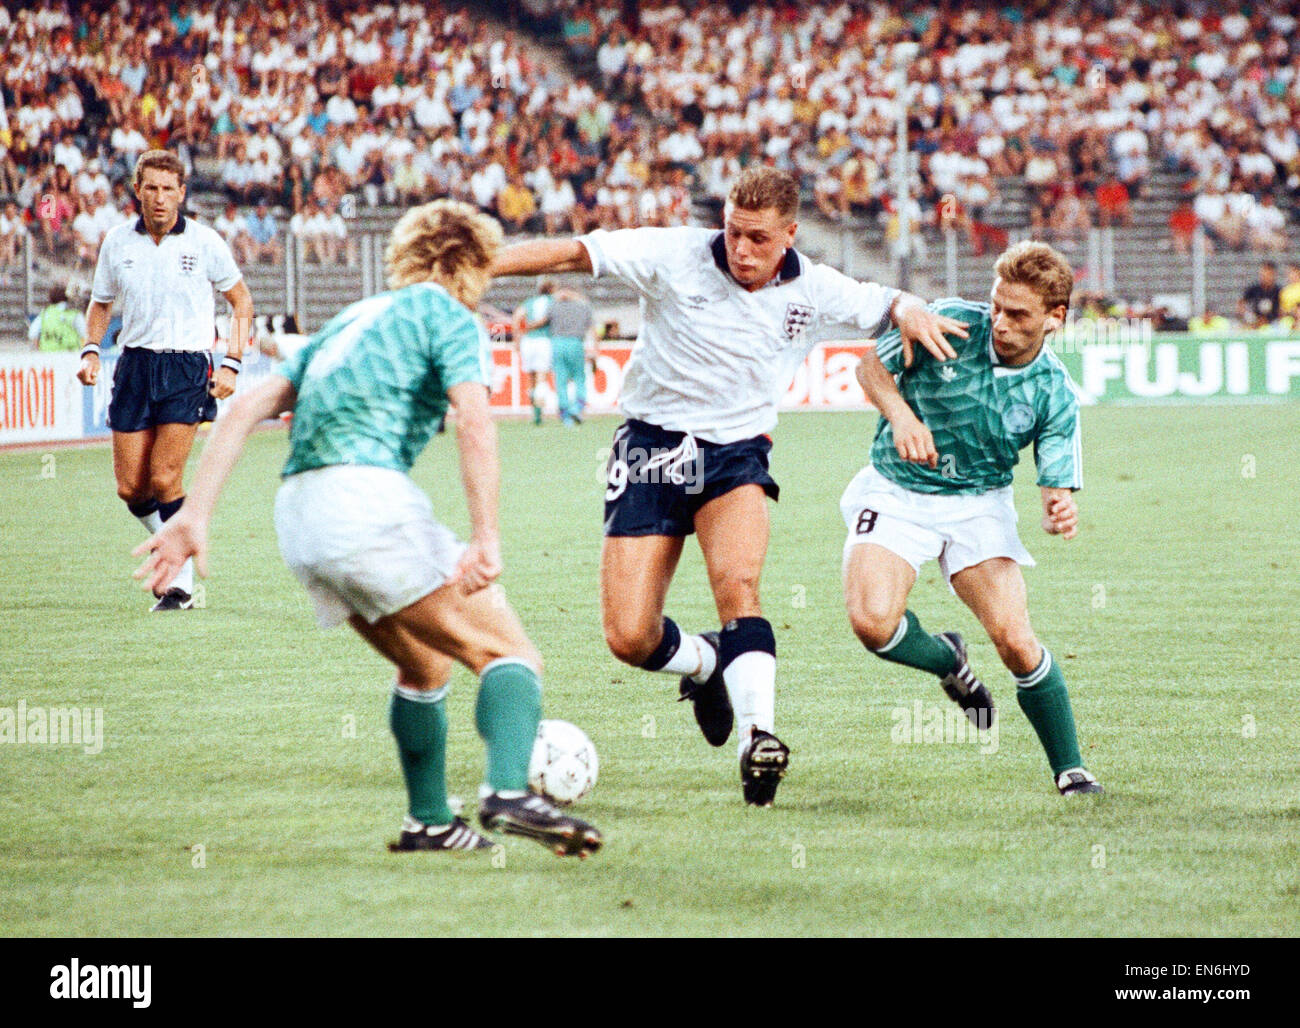 1990 World Cup Semi Final match the Stadio delle Alpi in Turin, Italy. West Germany 1 v England 1 (West Germany won on penalties). England's Paul Gascoigne is challenged for the ball by Andreas Brehme (left) and Thomas Haessler during the match. 4th July Stock Photo